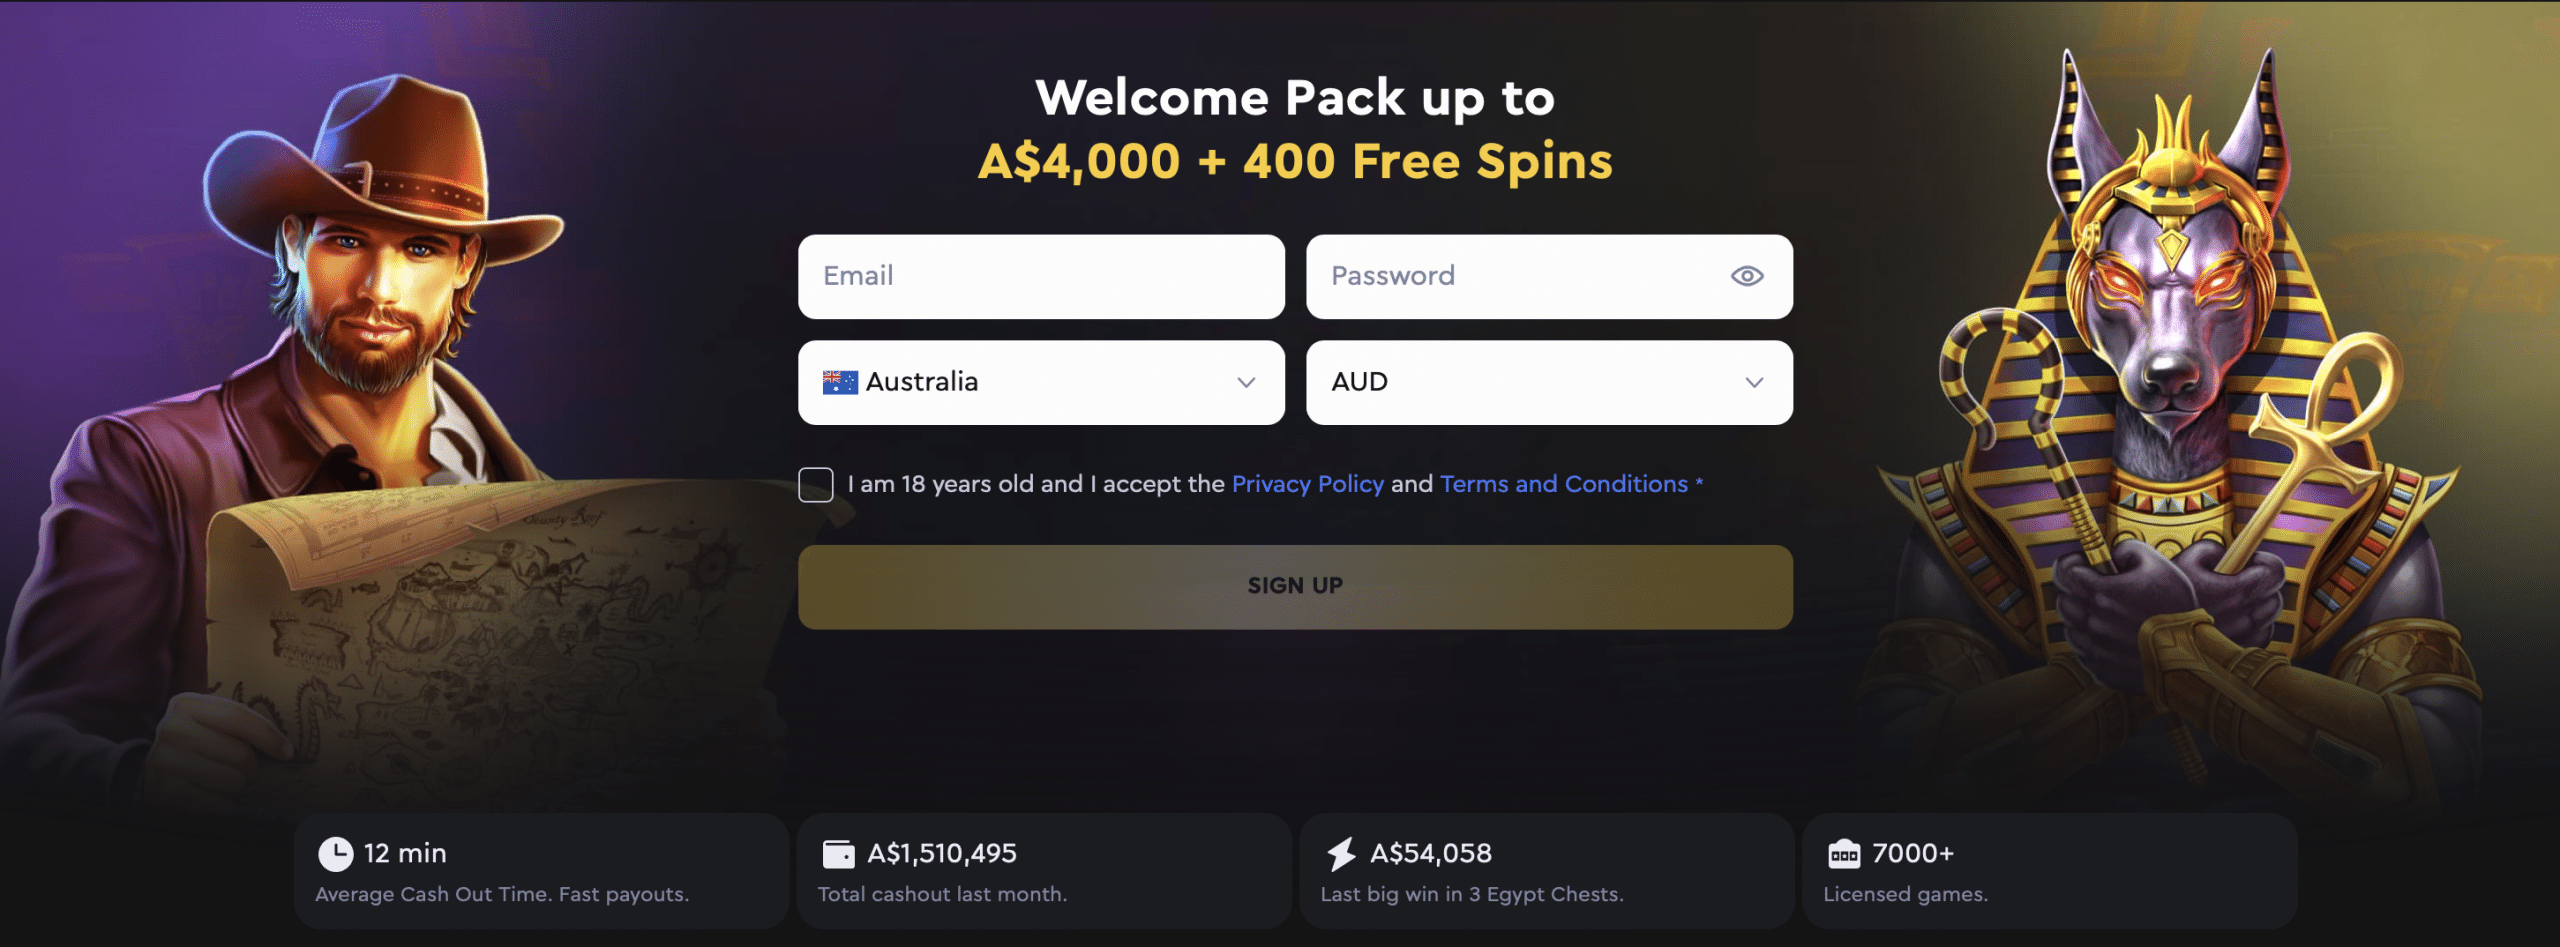 SkyCrown Casino Package for New players